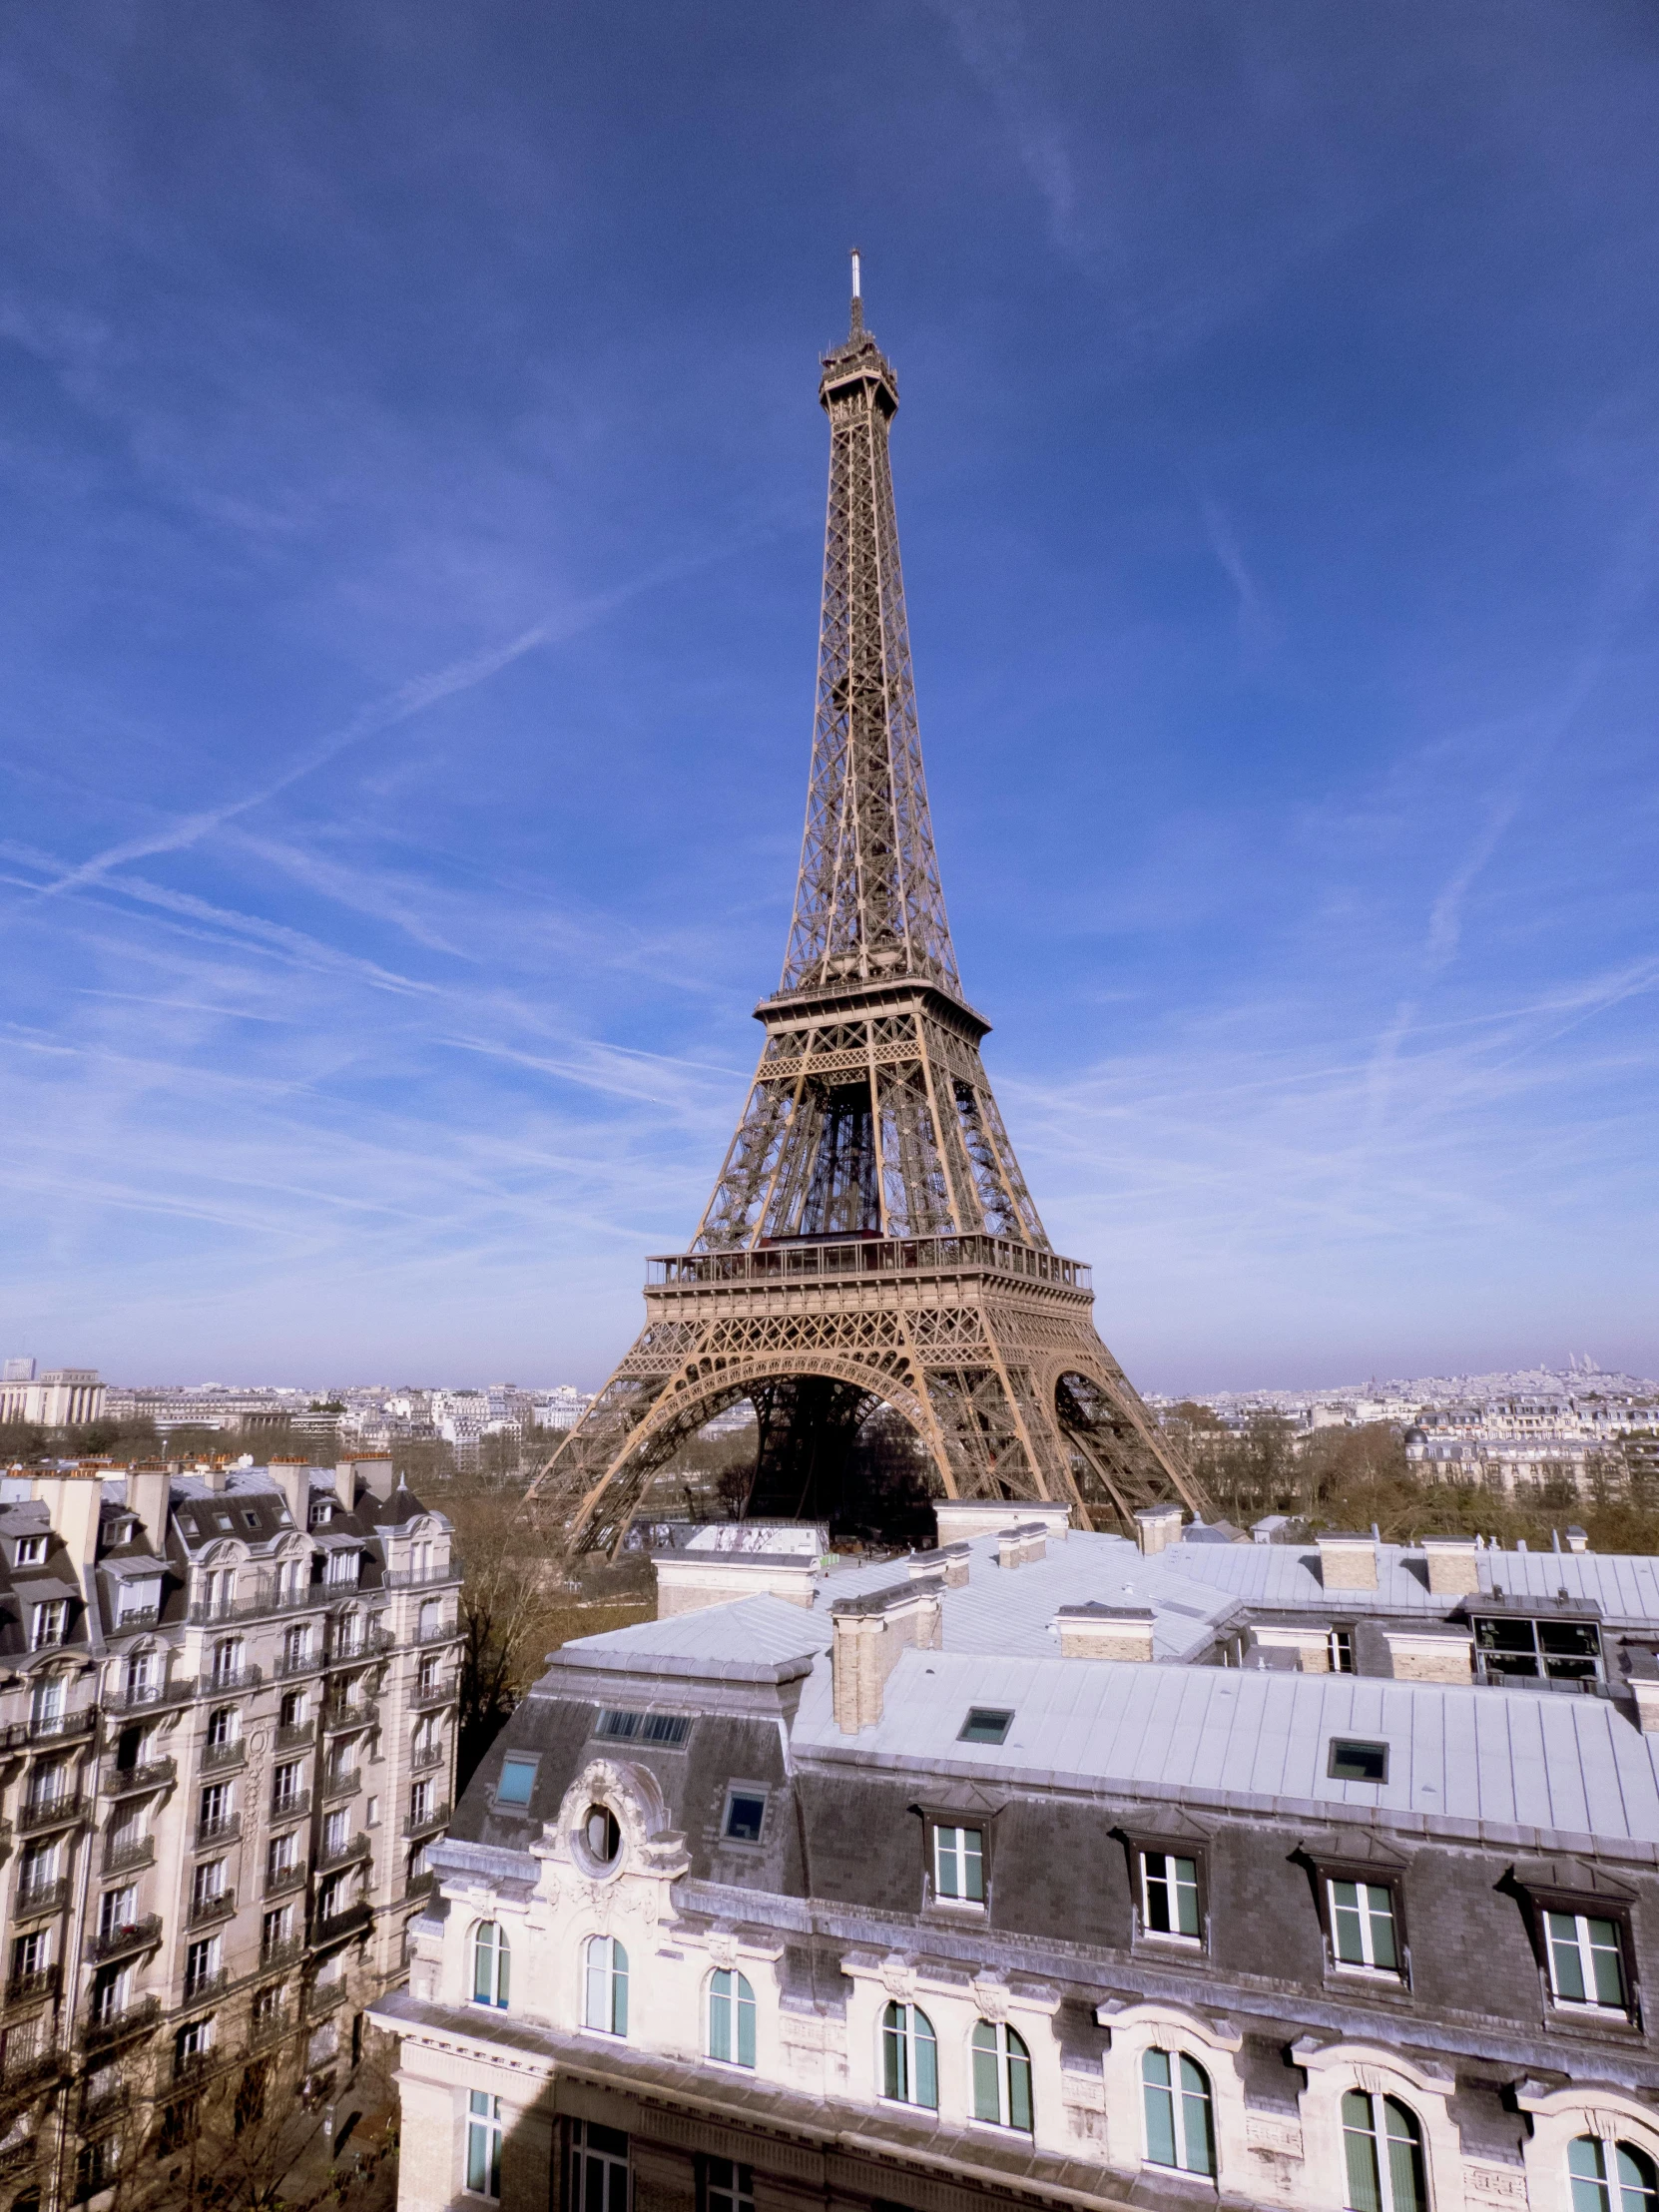 the eiffel tower towering over the city of paris, a photo, pexels contest winner, paris school, slide show, wide high angle view, neoclassical tower with dome, 8 k ”